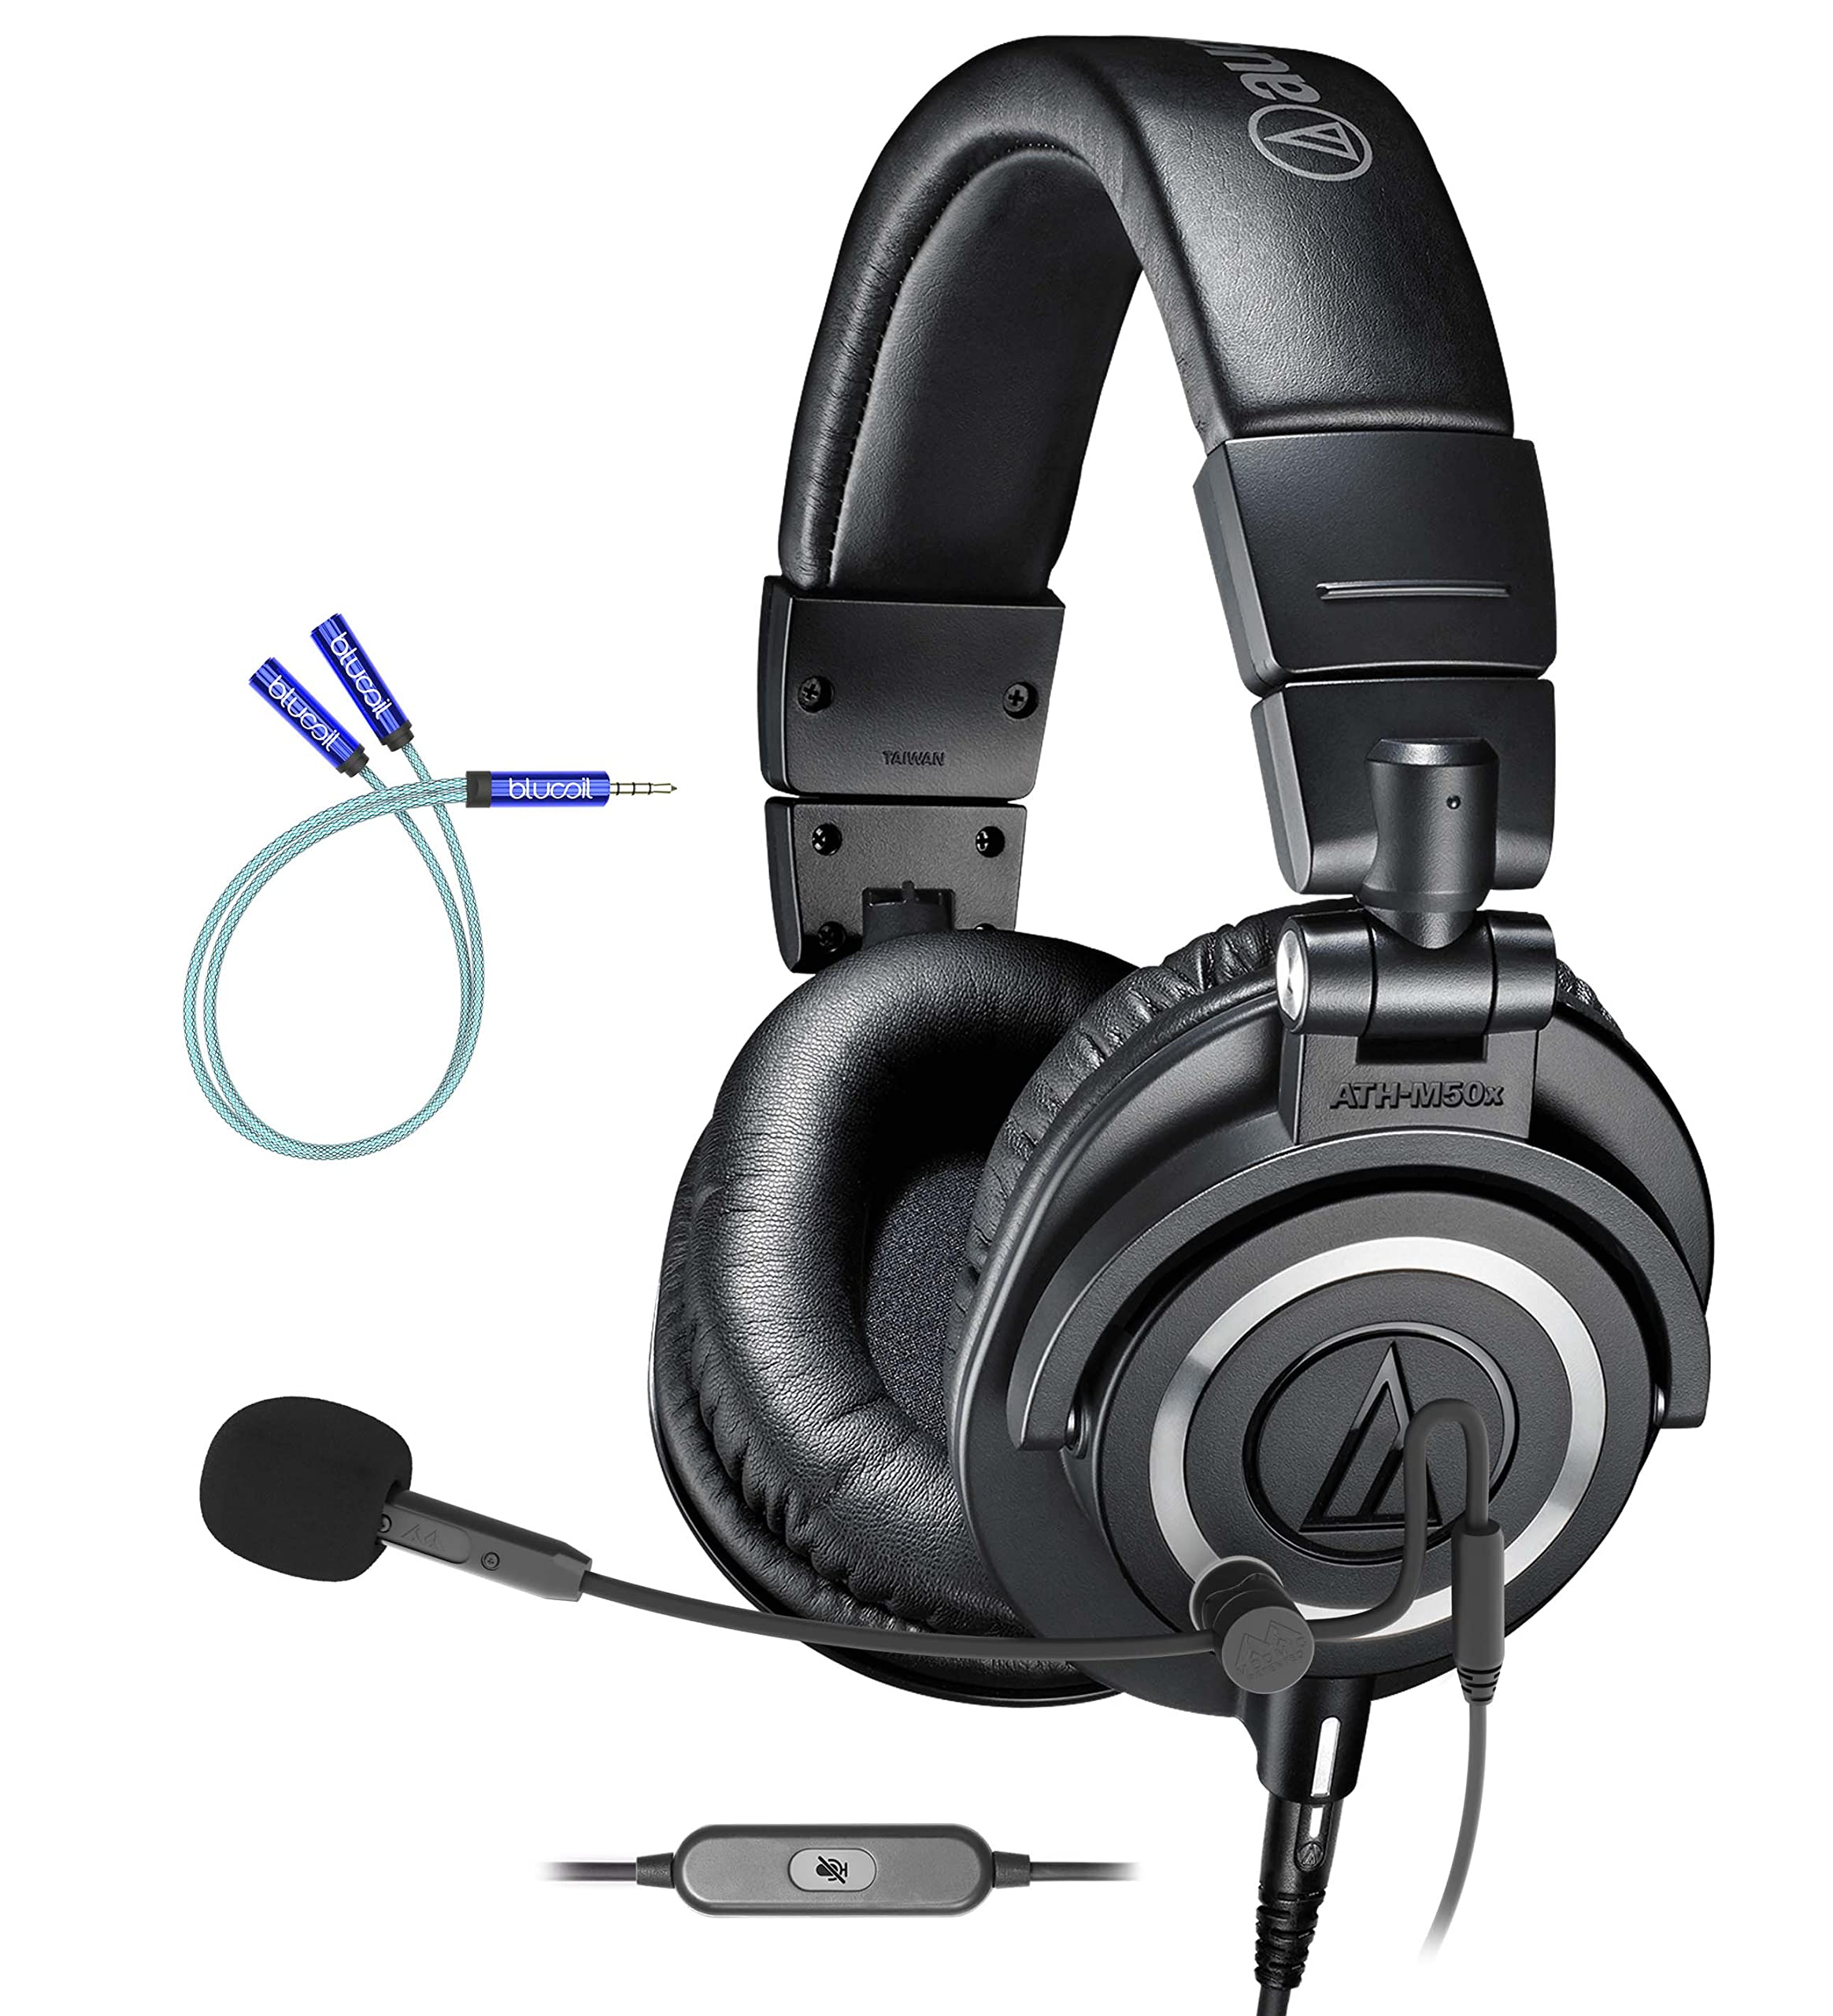 Mua Audio Technica ATH-M50x Professional Studio Monitor Headphones, Black  Bundle with Antlion Audio ModMic USB Attachable Noise-Cancelling Microphone  with Mute Switch, and Blucoil Y Splitter Cable trên Amazon Mỹ chính hãng  2023 |